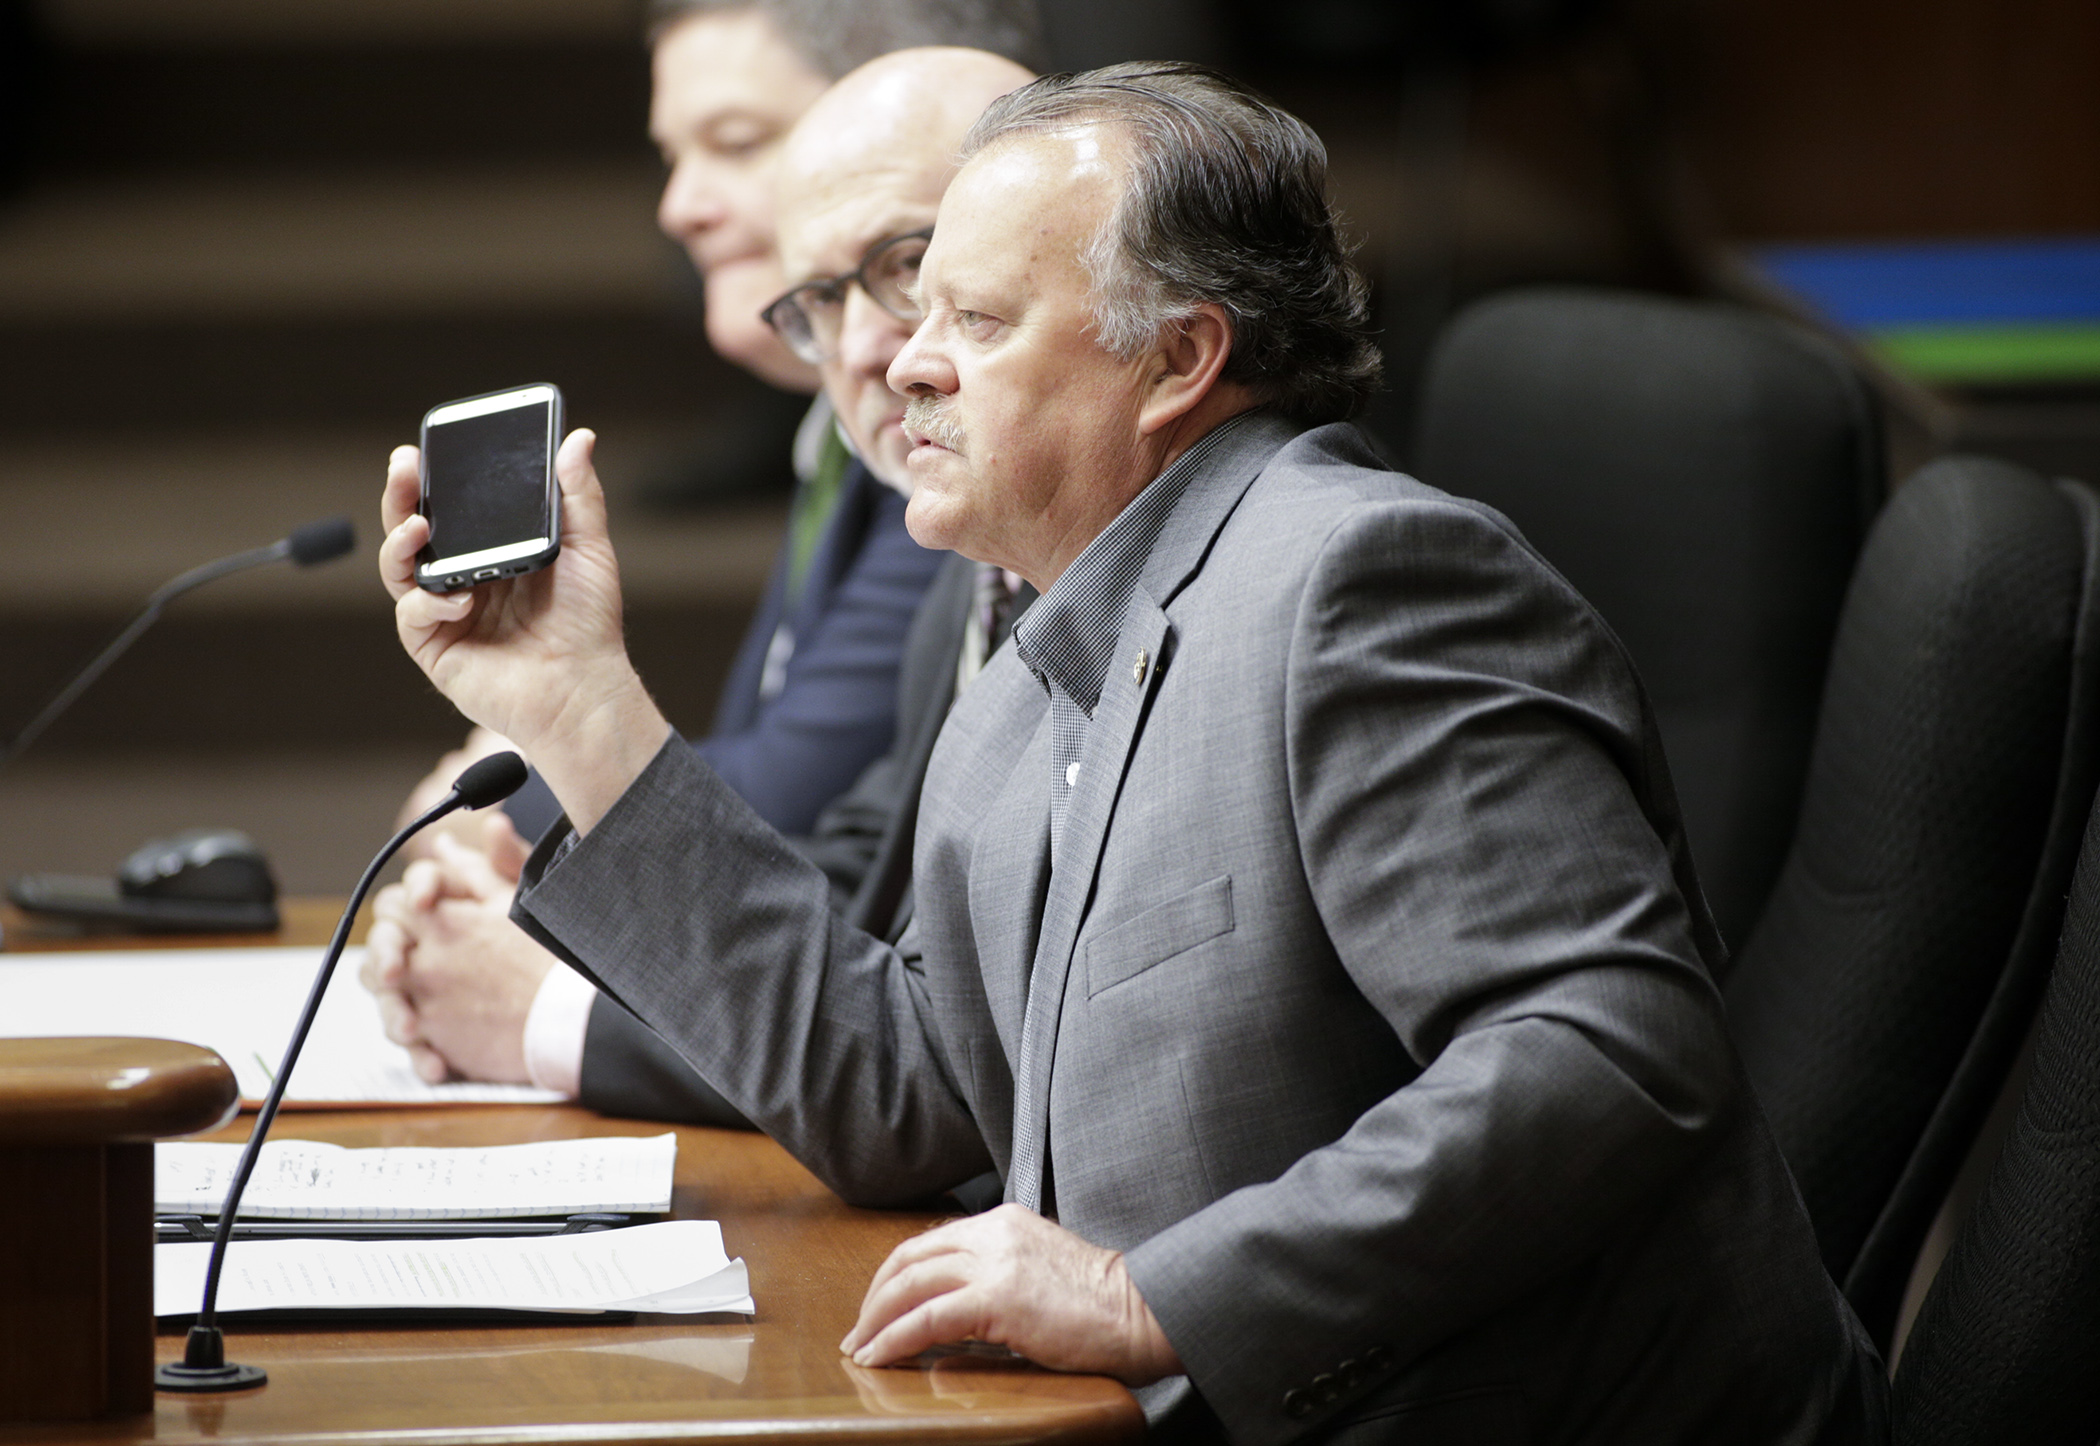 Rep. Mark Uglem holds a mobile phone while testifying May 10 in the House Ways and Means Committee on his bill HF1180, which would mandate hands-free cell phone use while driving. Photo by Paul Battaglia